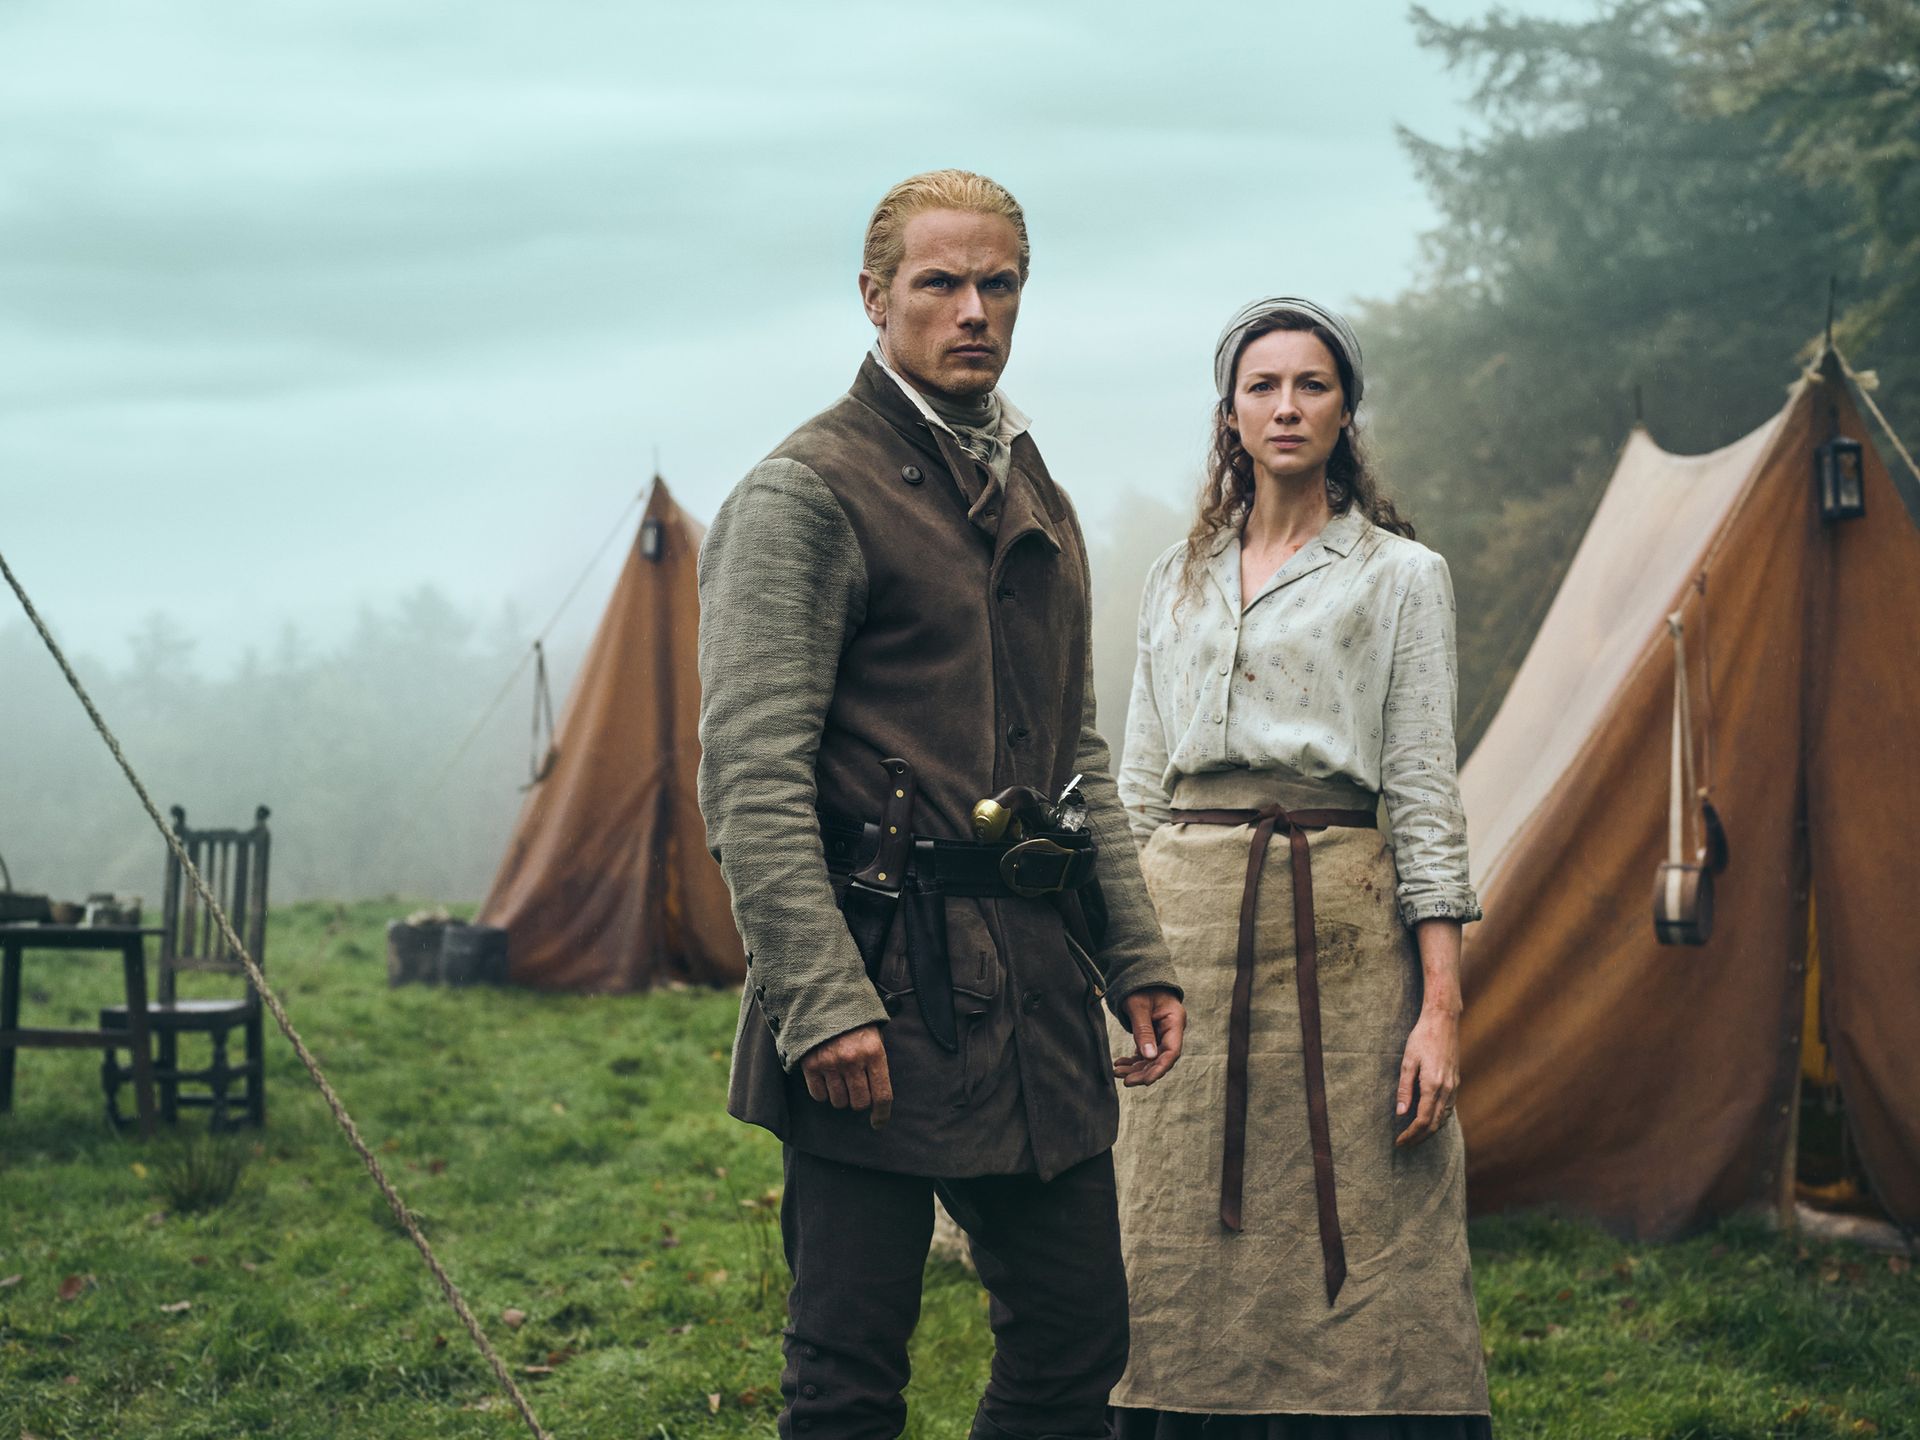 Outlander Season 6: Trailer, Release Date, and Everything We Know So Far